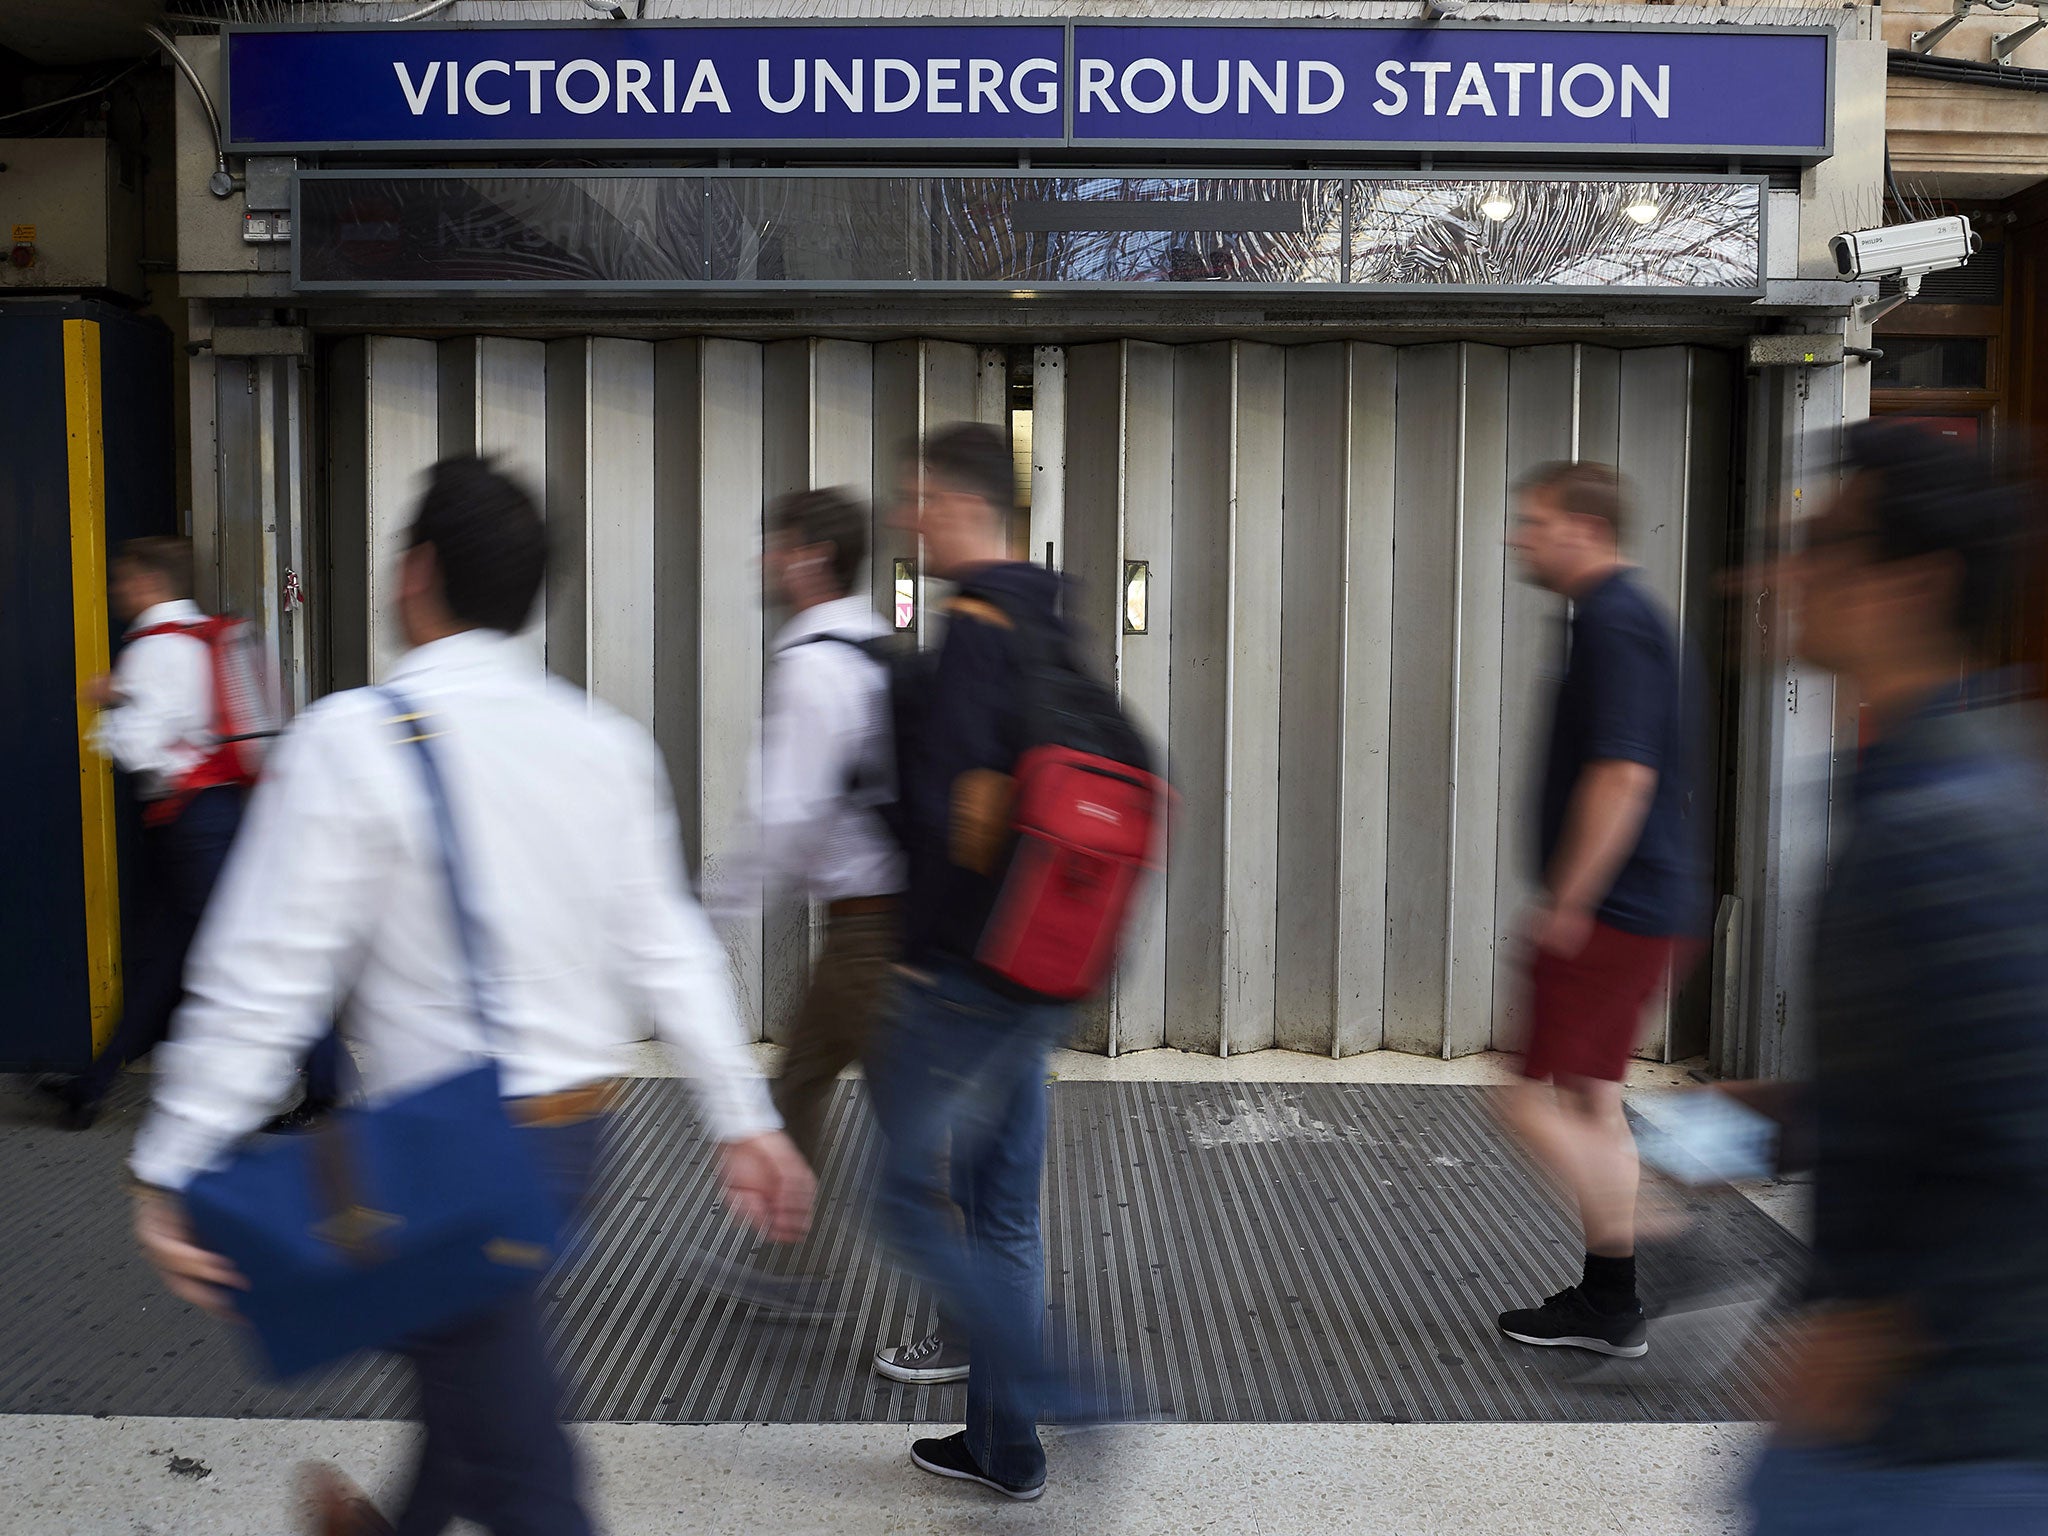 The union said nearly 900 jobs will be cut at stations while passenger figures keep increasing